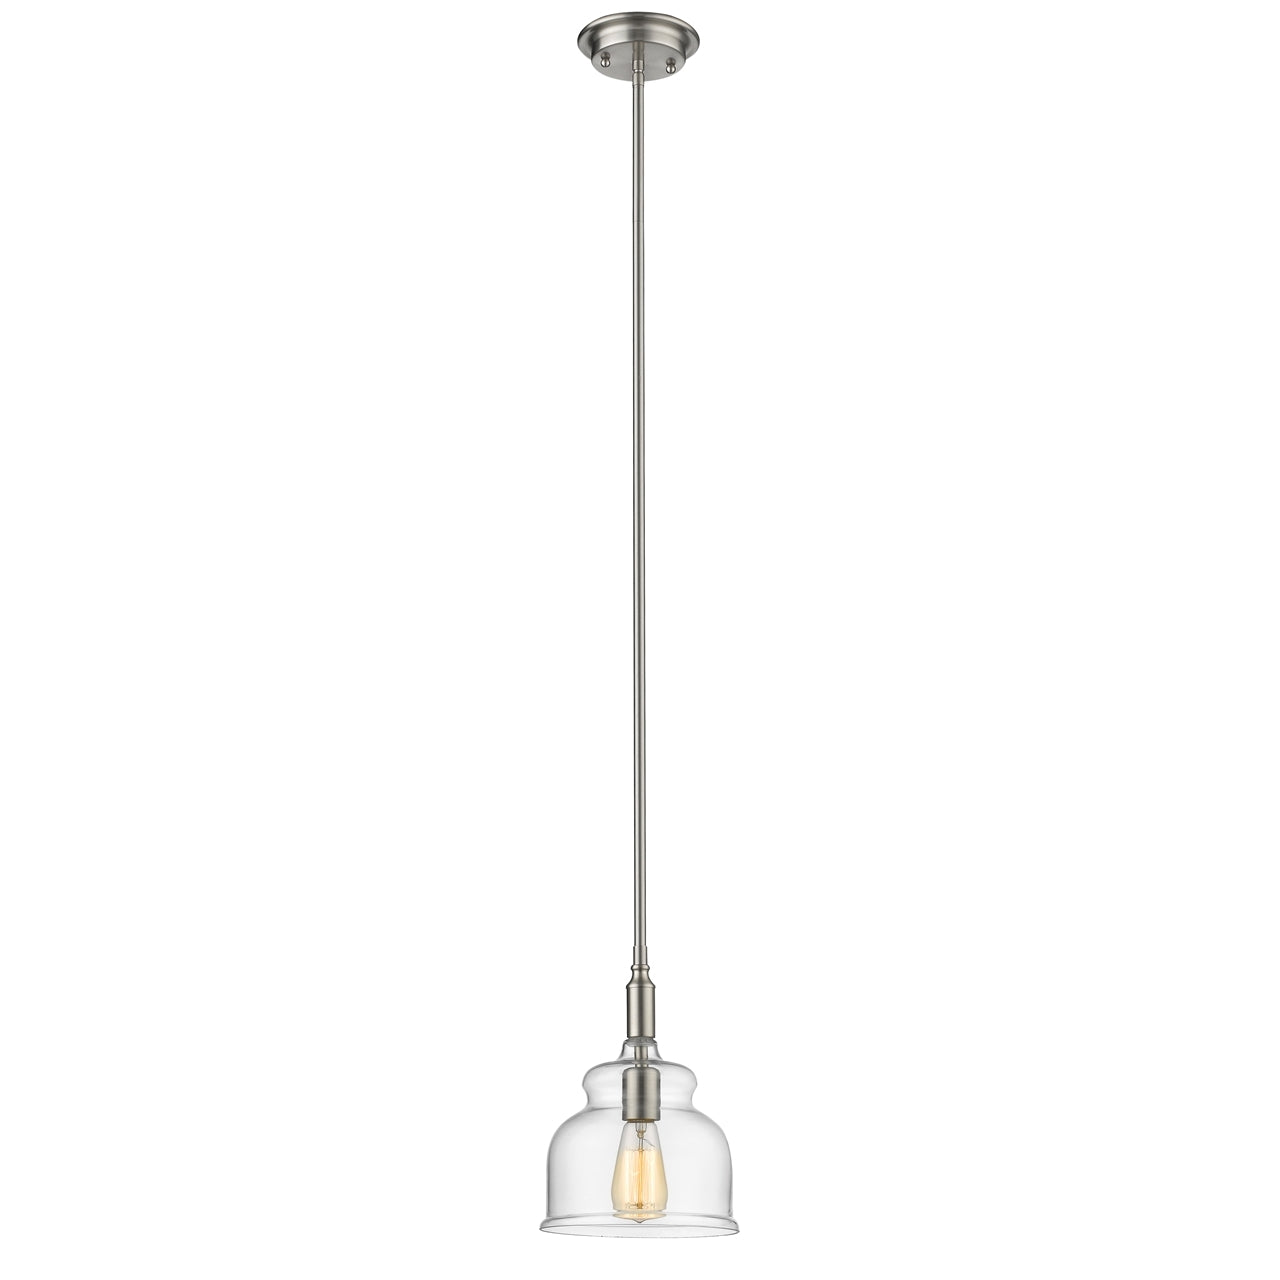 ZOE Transitional 1 Light Brushed Nickel Ceiling Mini Pendant 8" Wide